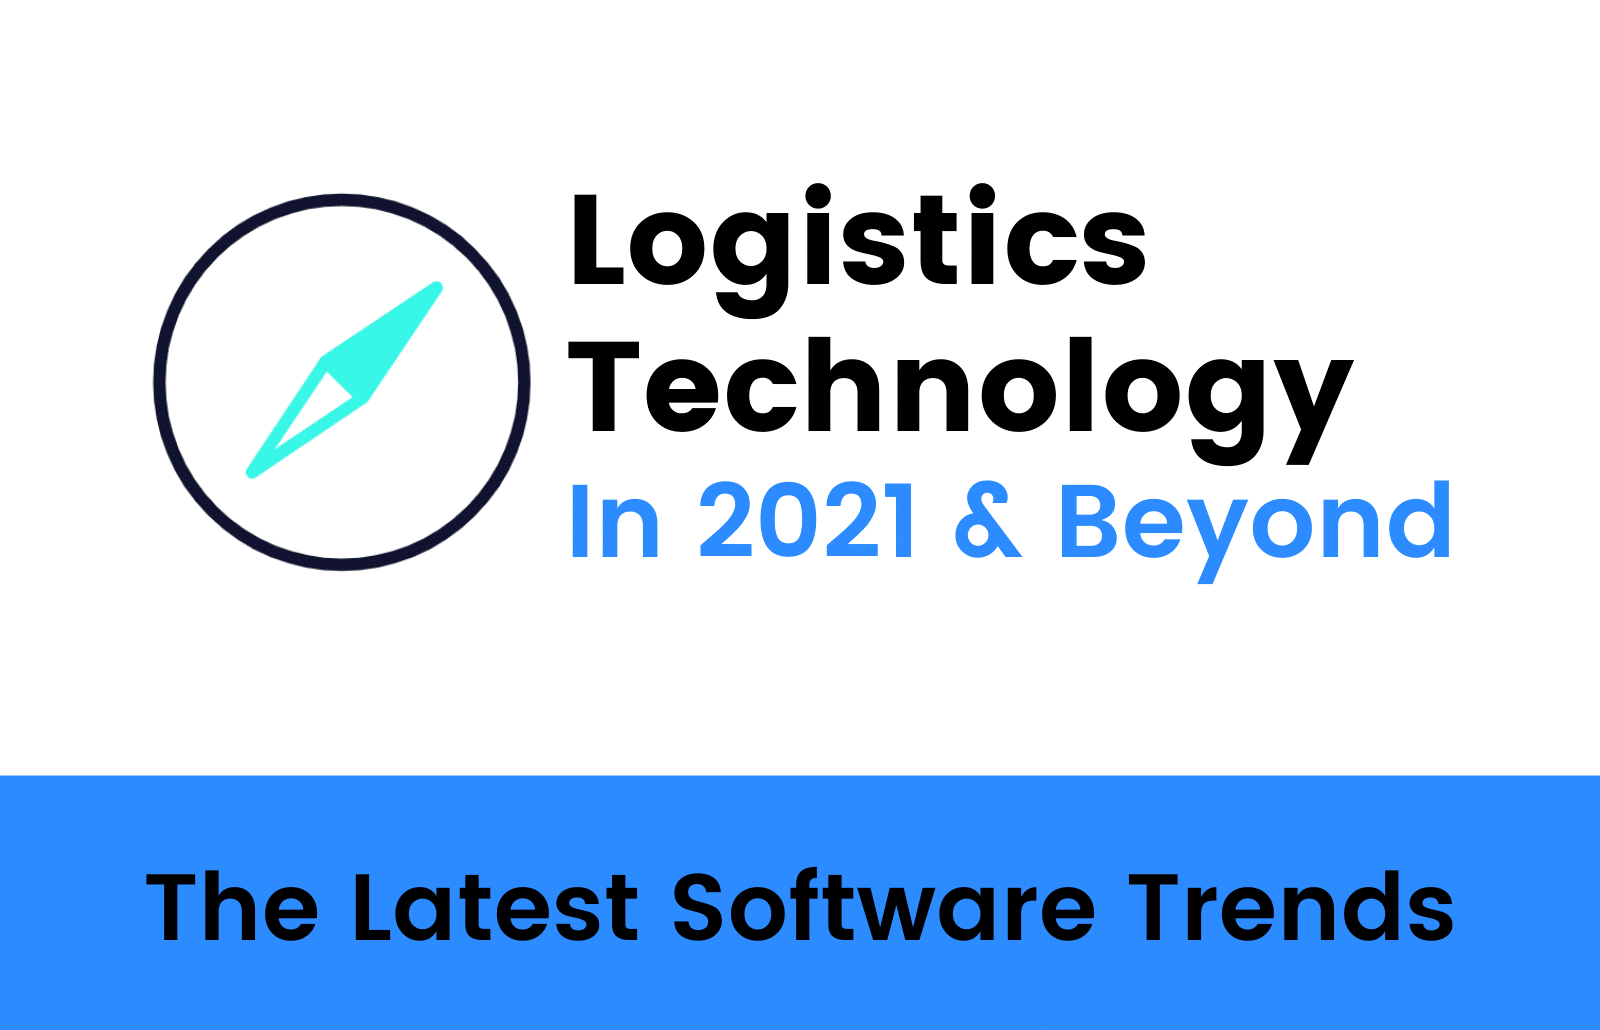 logistics technology trends in 2021